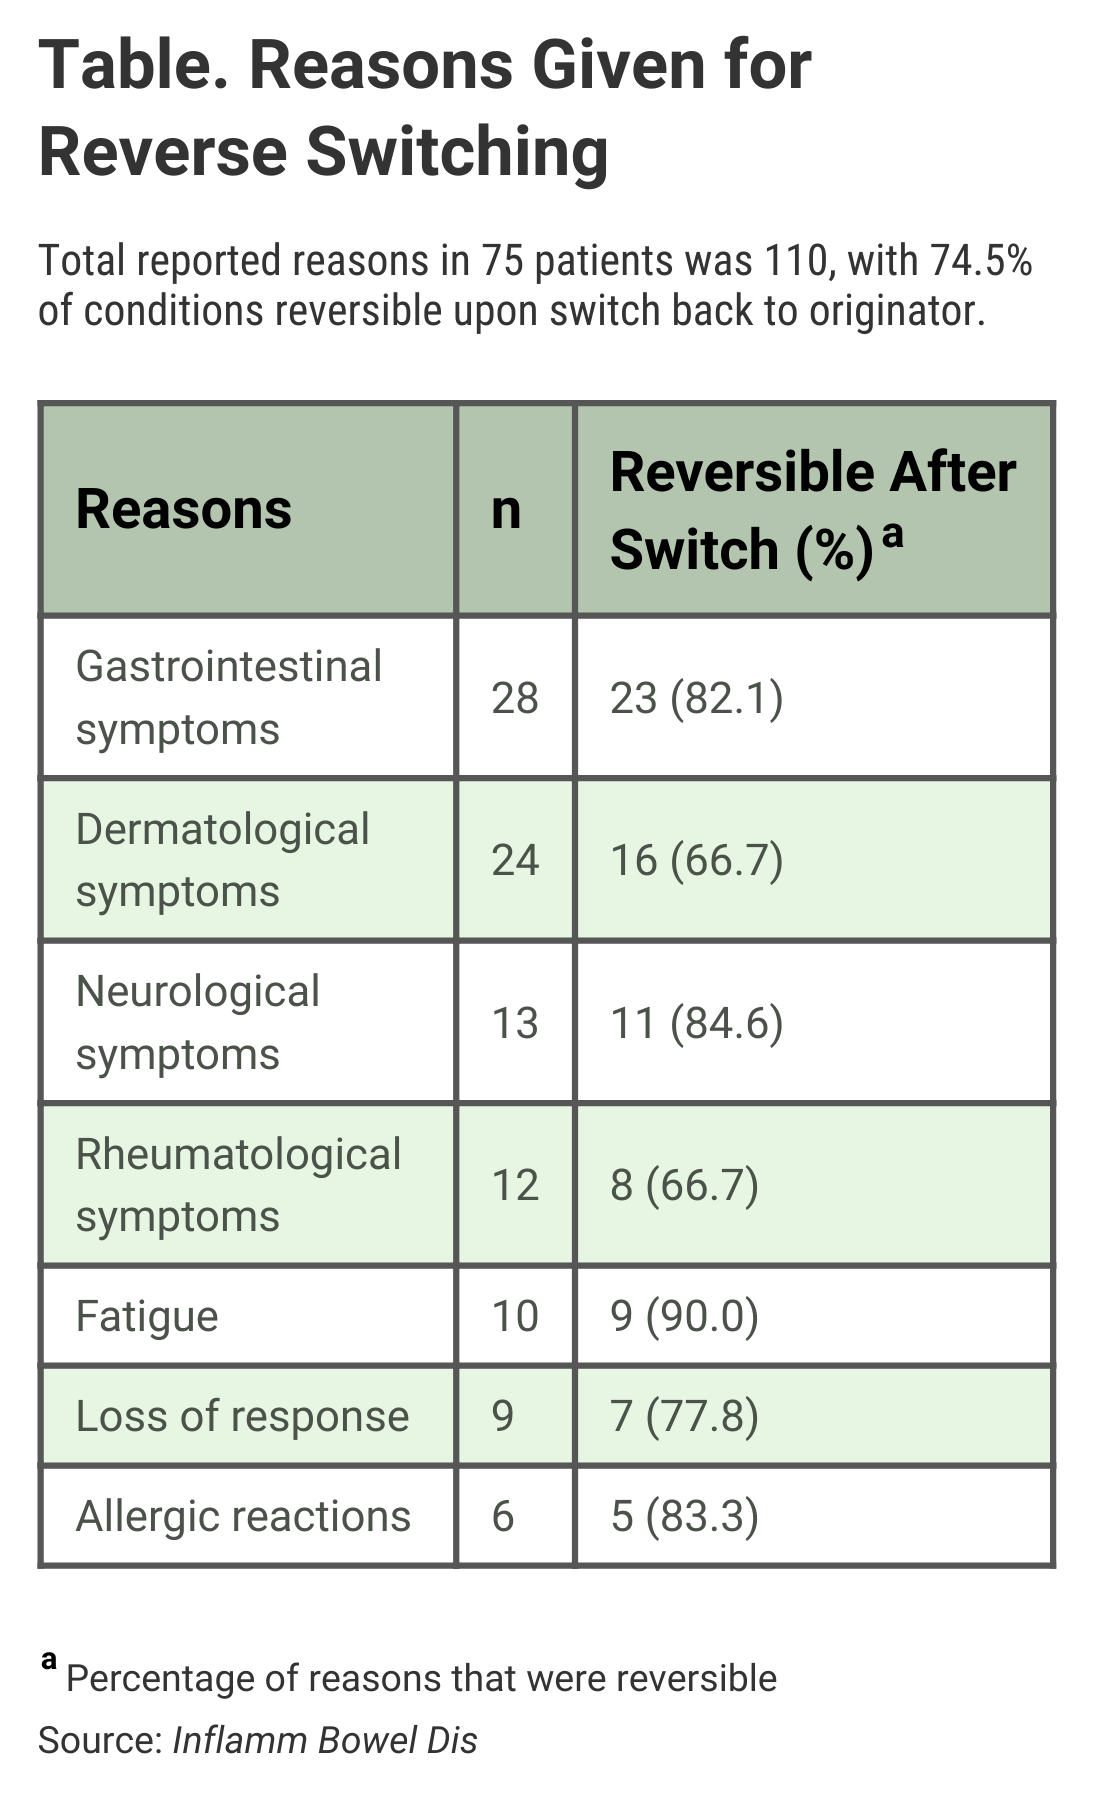 Table. Reasons for Reverse Switching